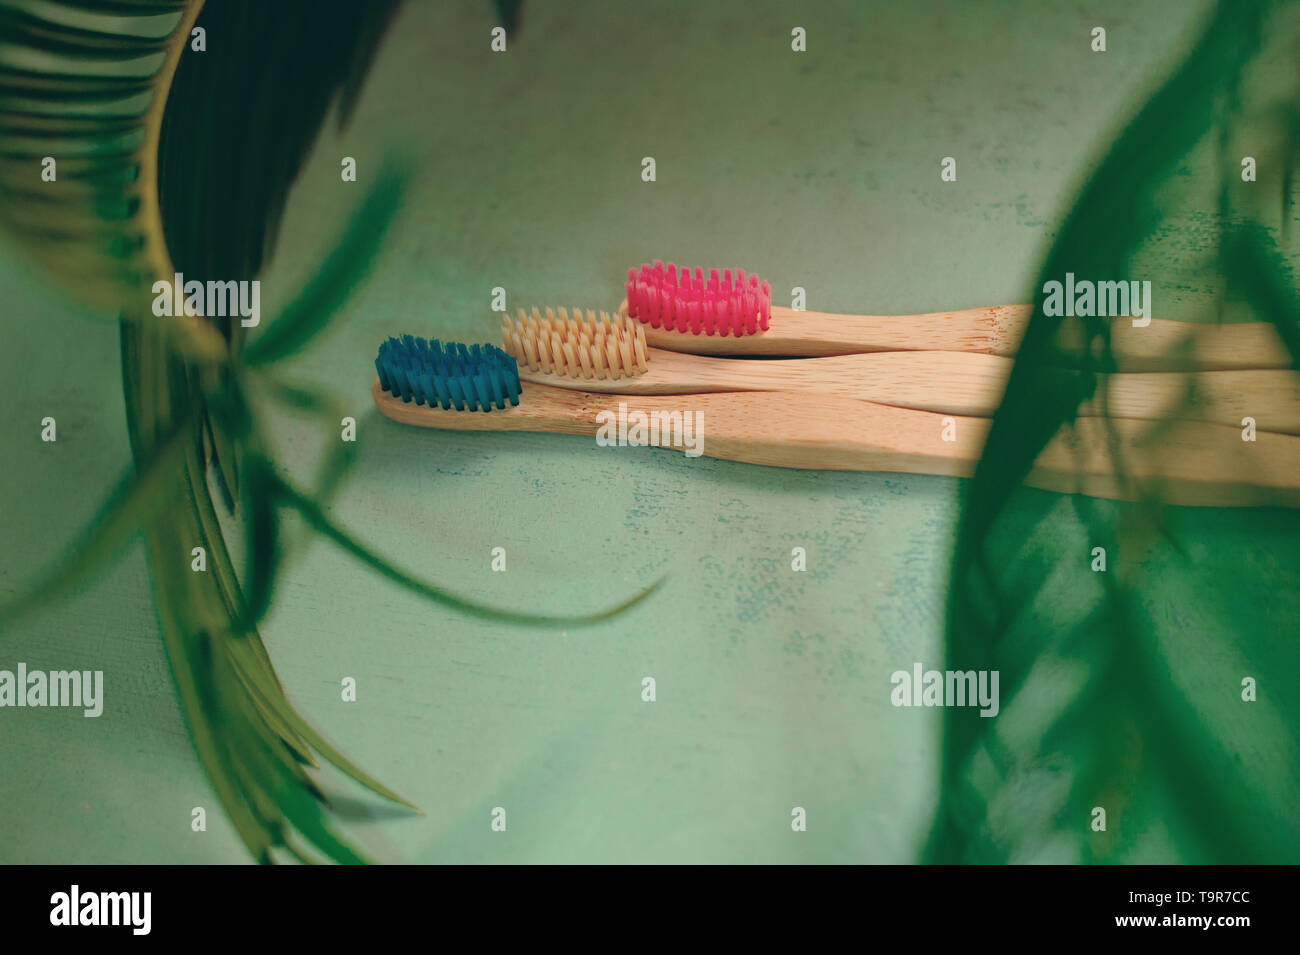 4 bamboo toothbrushes over green background and green palm leaf Stock Photo